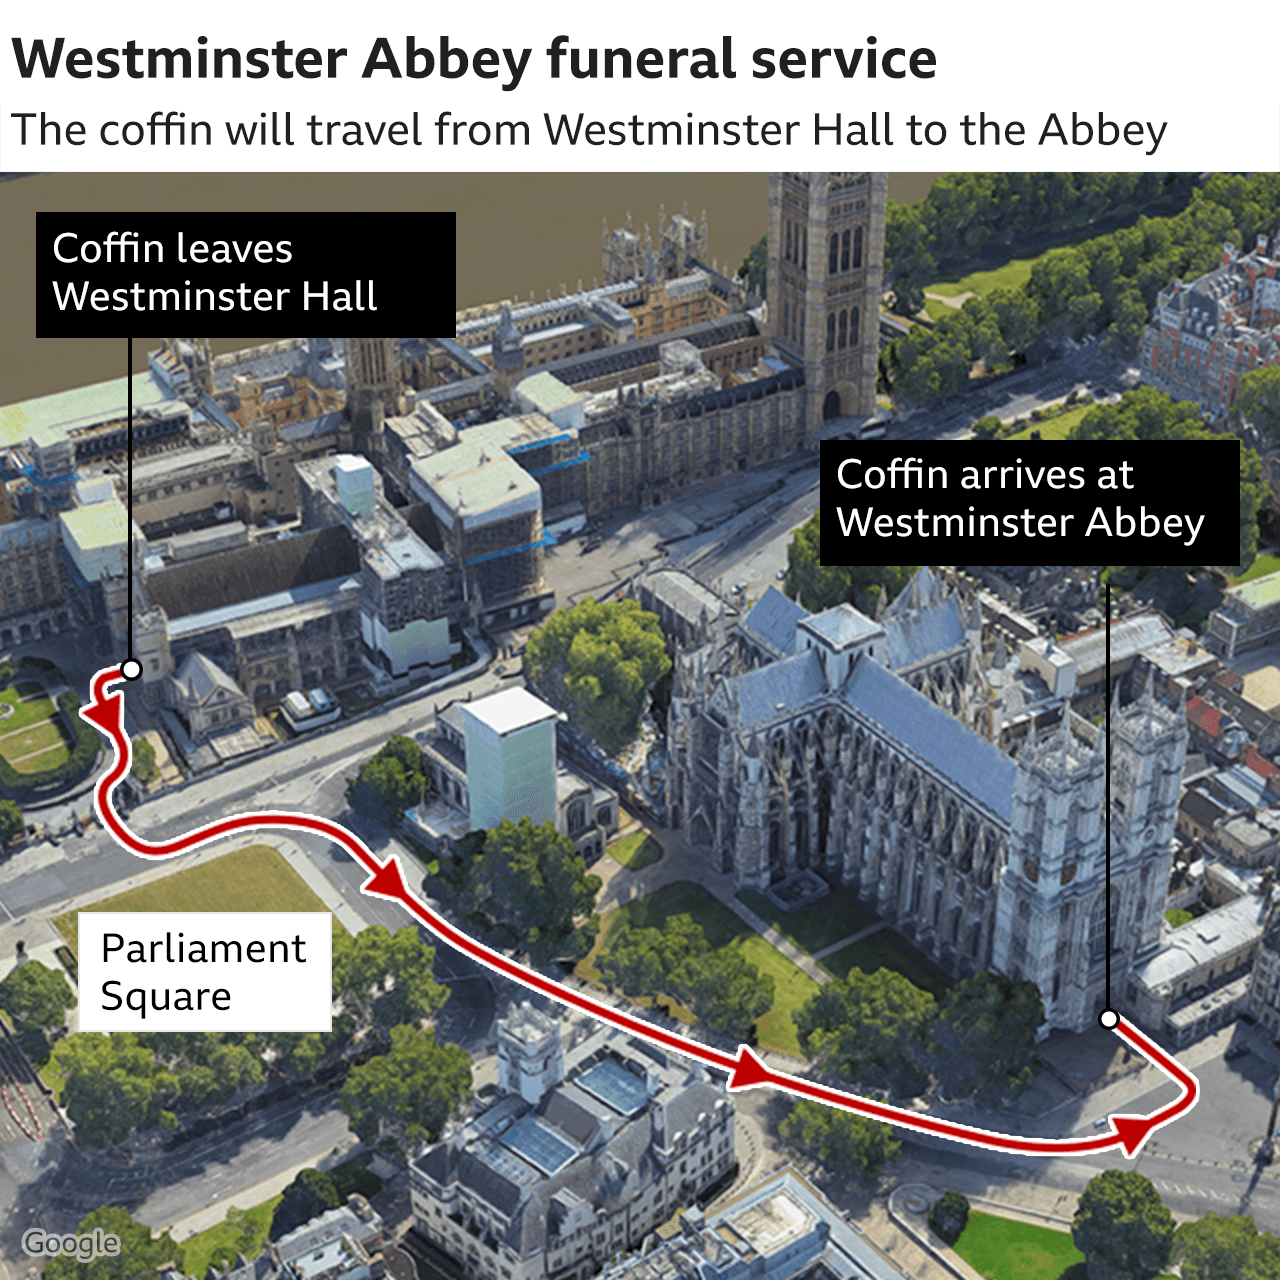 Route from Westminster Hall to Westminster Abbey